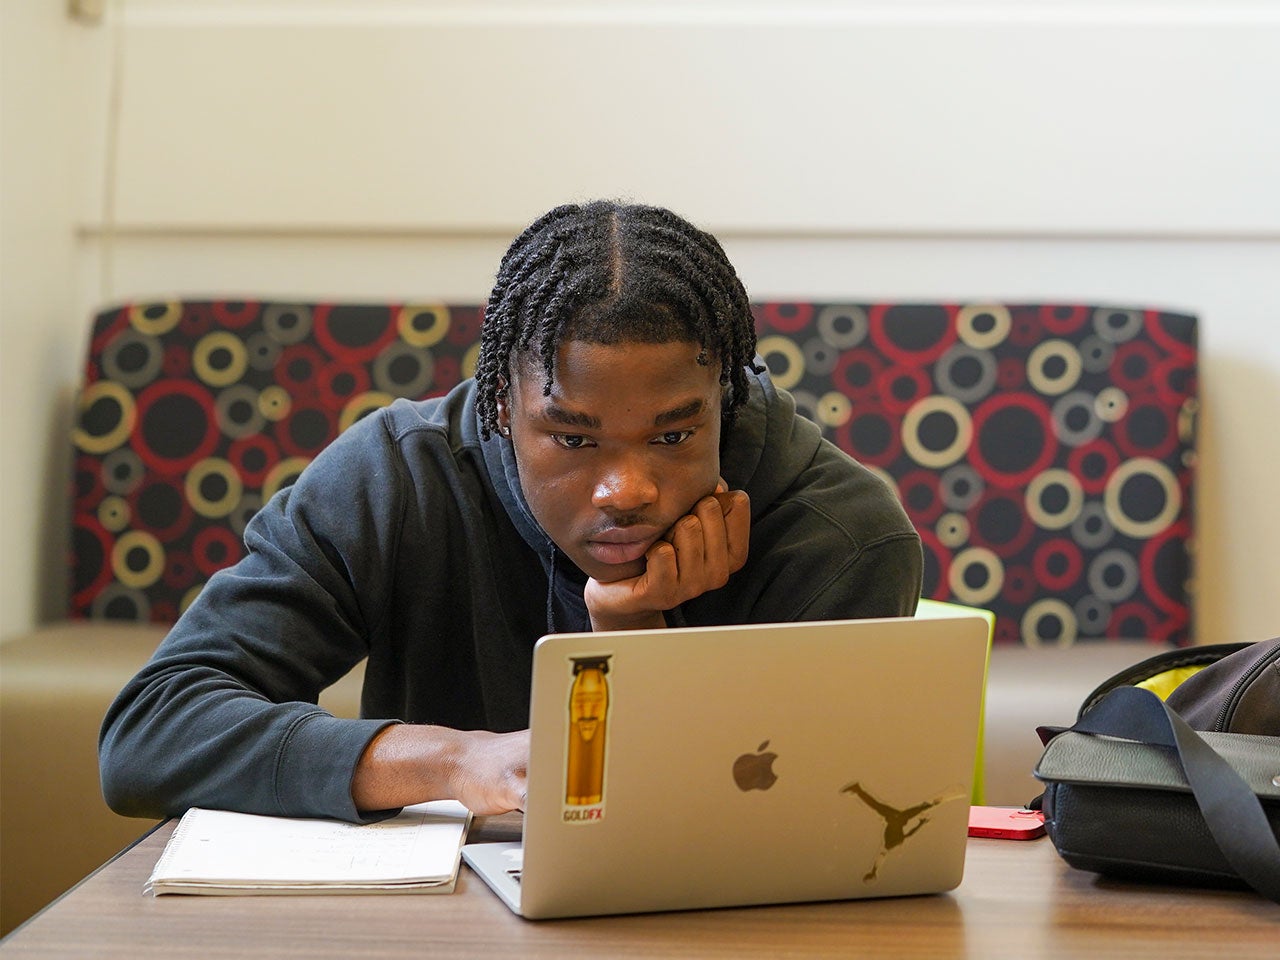 A UC Davis student researches on a silver laptop.